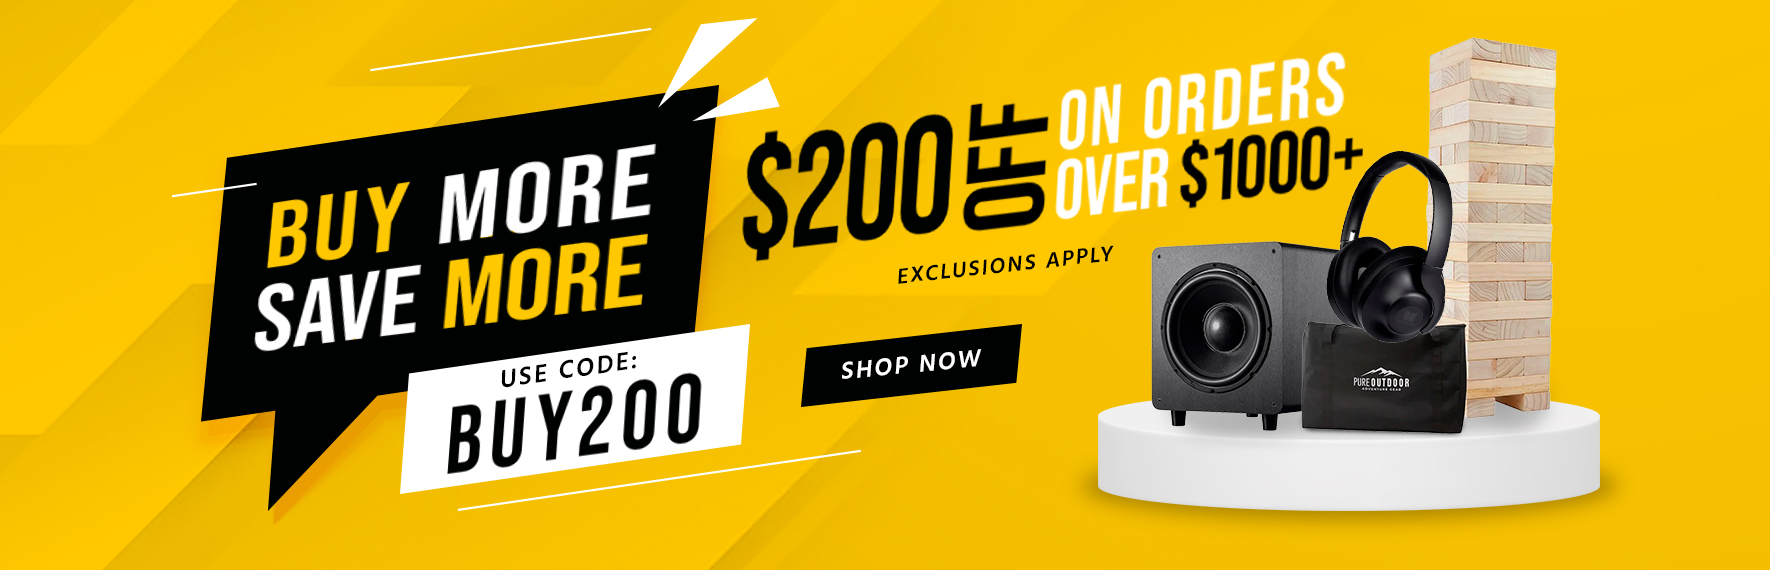 Buy More, Save More Get $200 off orders of $1000+  Use Code: BUY200 Exclusions Apply. Shop Now